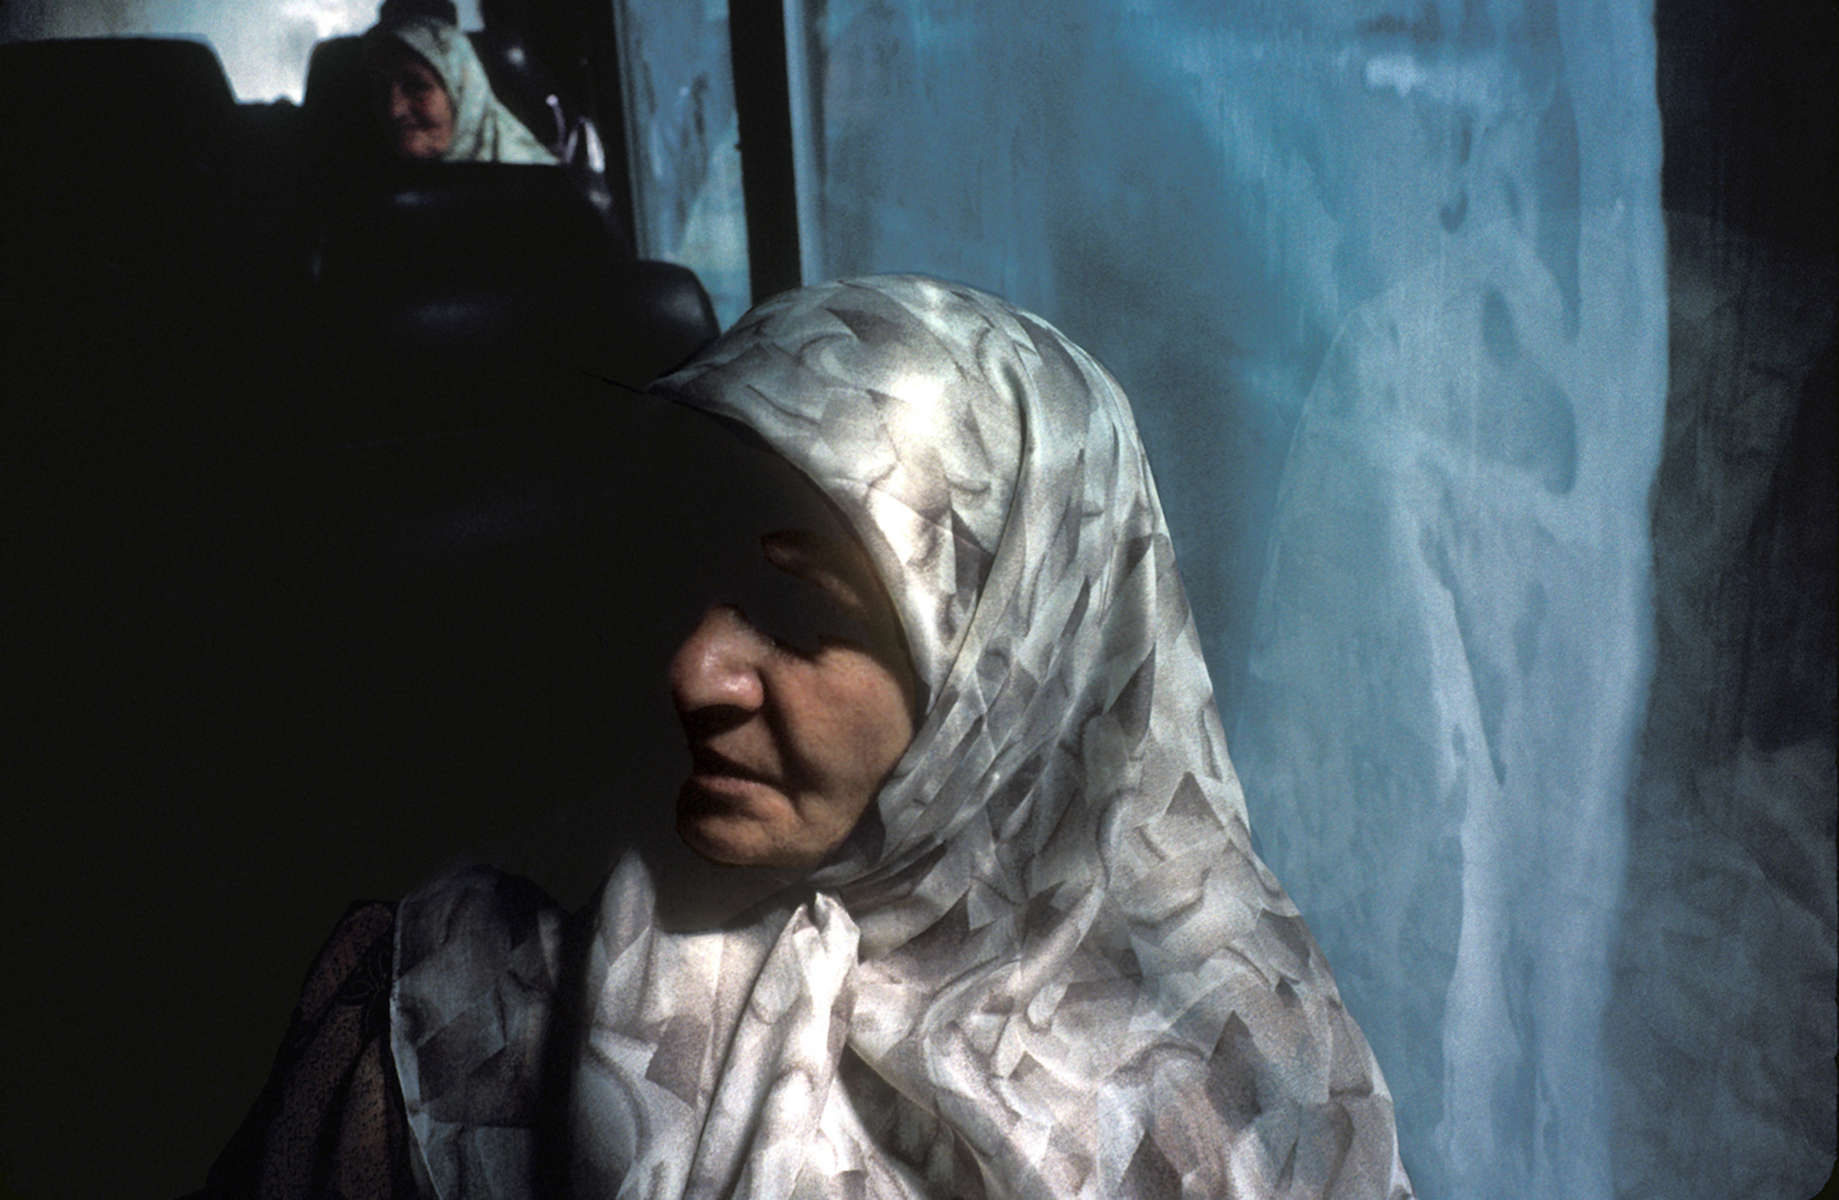 A Srebrenica widow on board a bus going to the groundbreaking ceremonies for a memorial to the 7,000 to 8,000 Muslim men and boys who were killed by Serb forces in 1995.